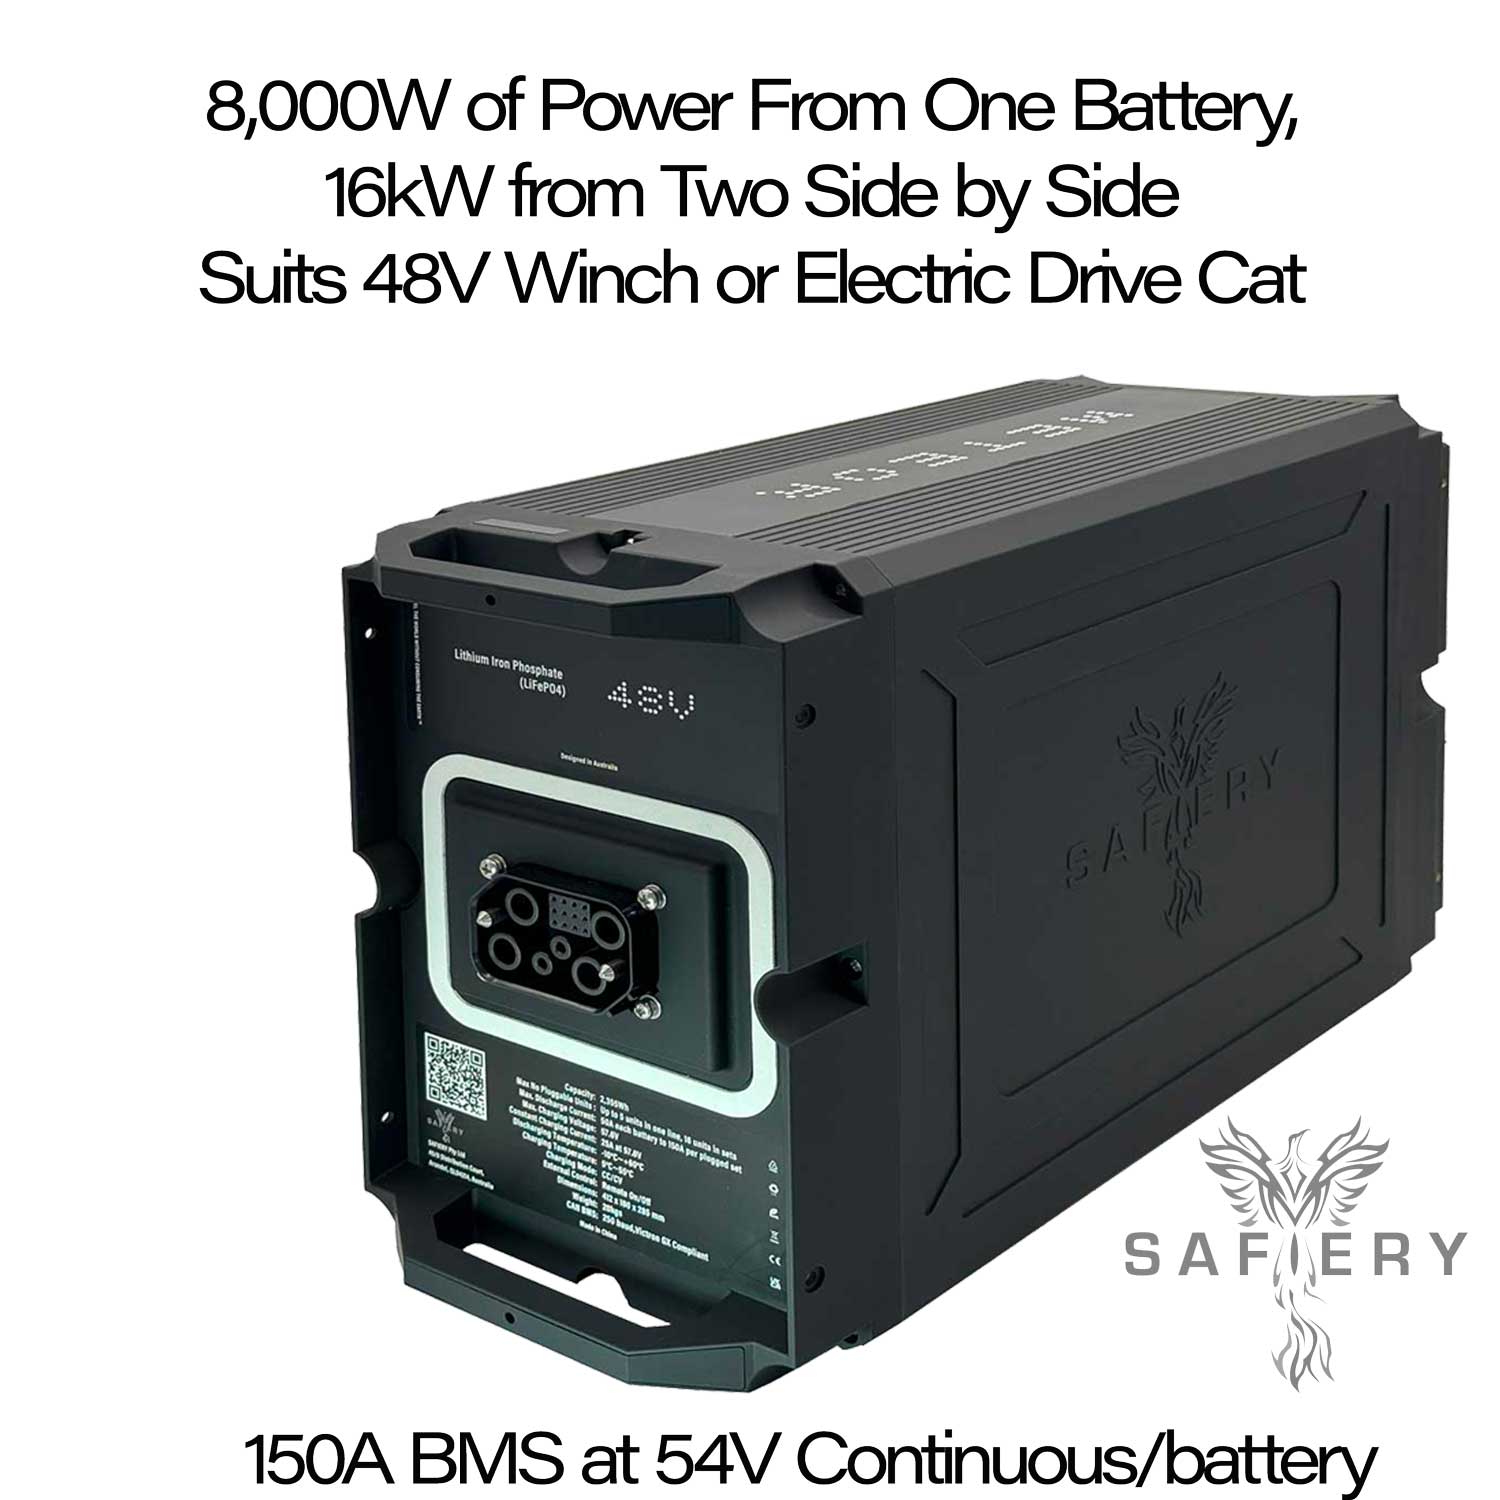 Can be Dual Voltage Battery with 8000W of 48V power 12-48V DC DC